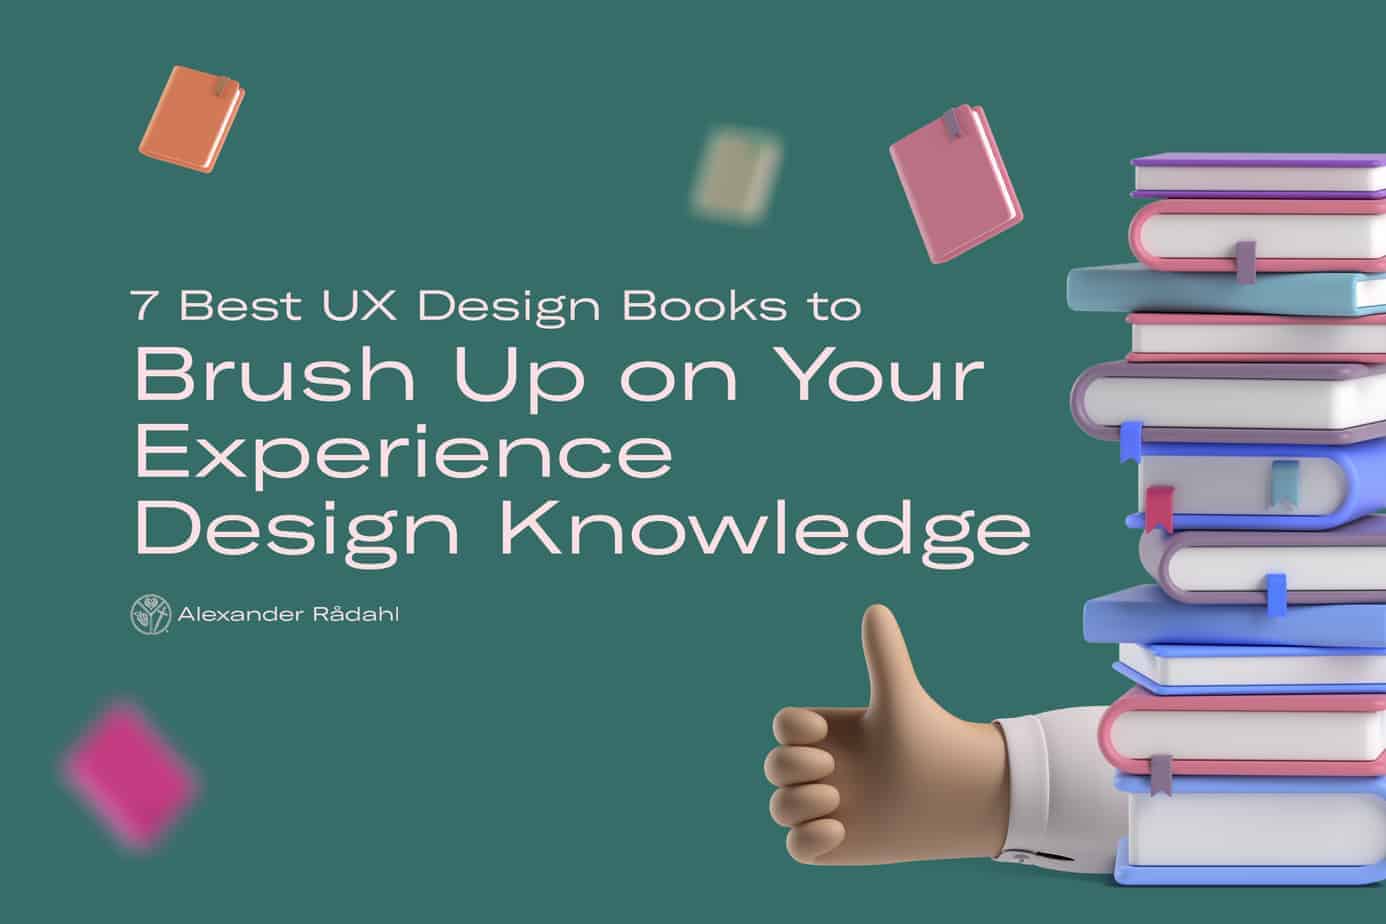 7 best ux design books to brush up on your experience design knowledge